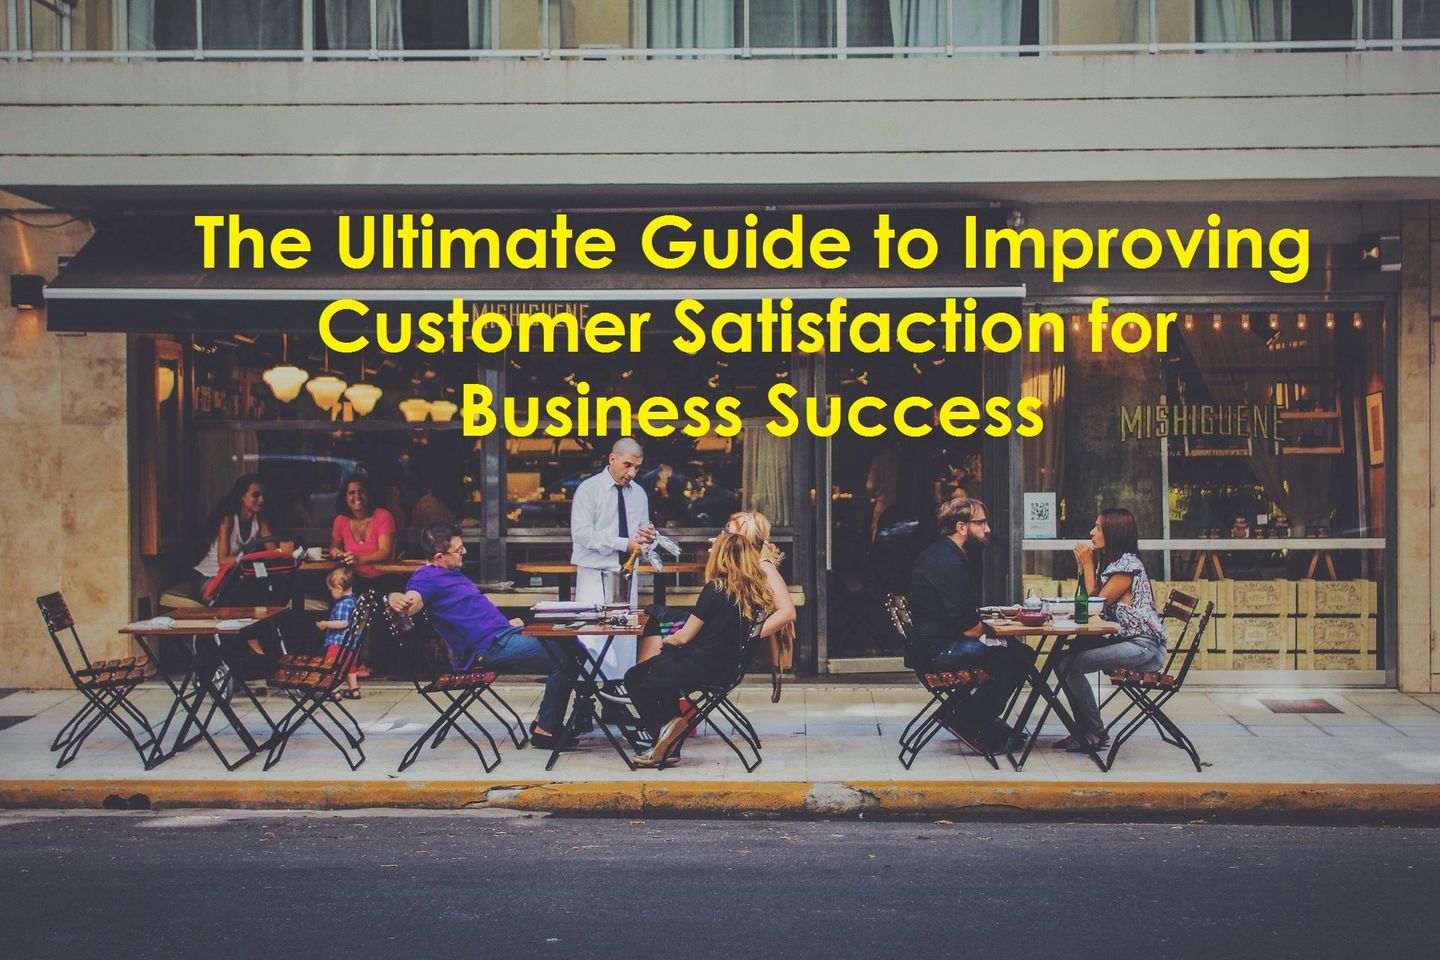 The Ultimate Guide to Improving Customer Satisfaction for Business Success